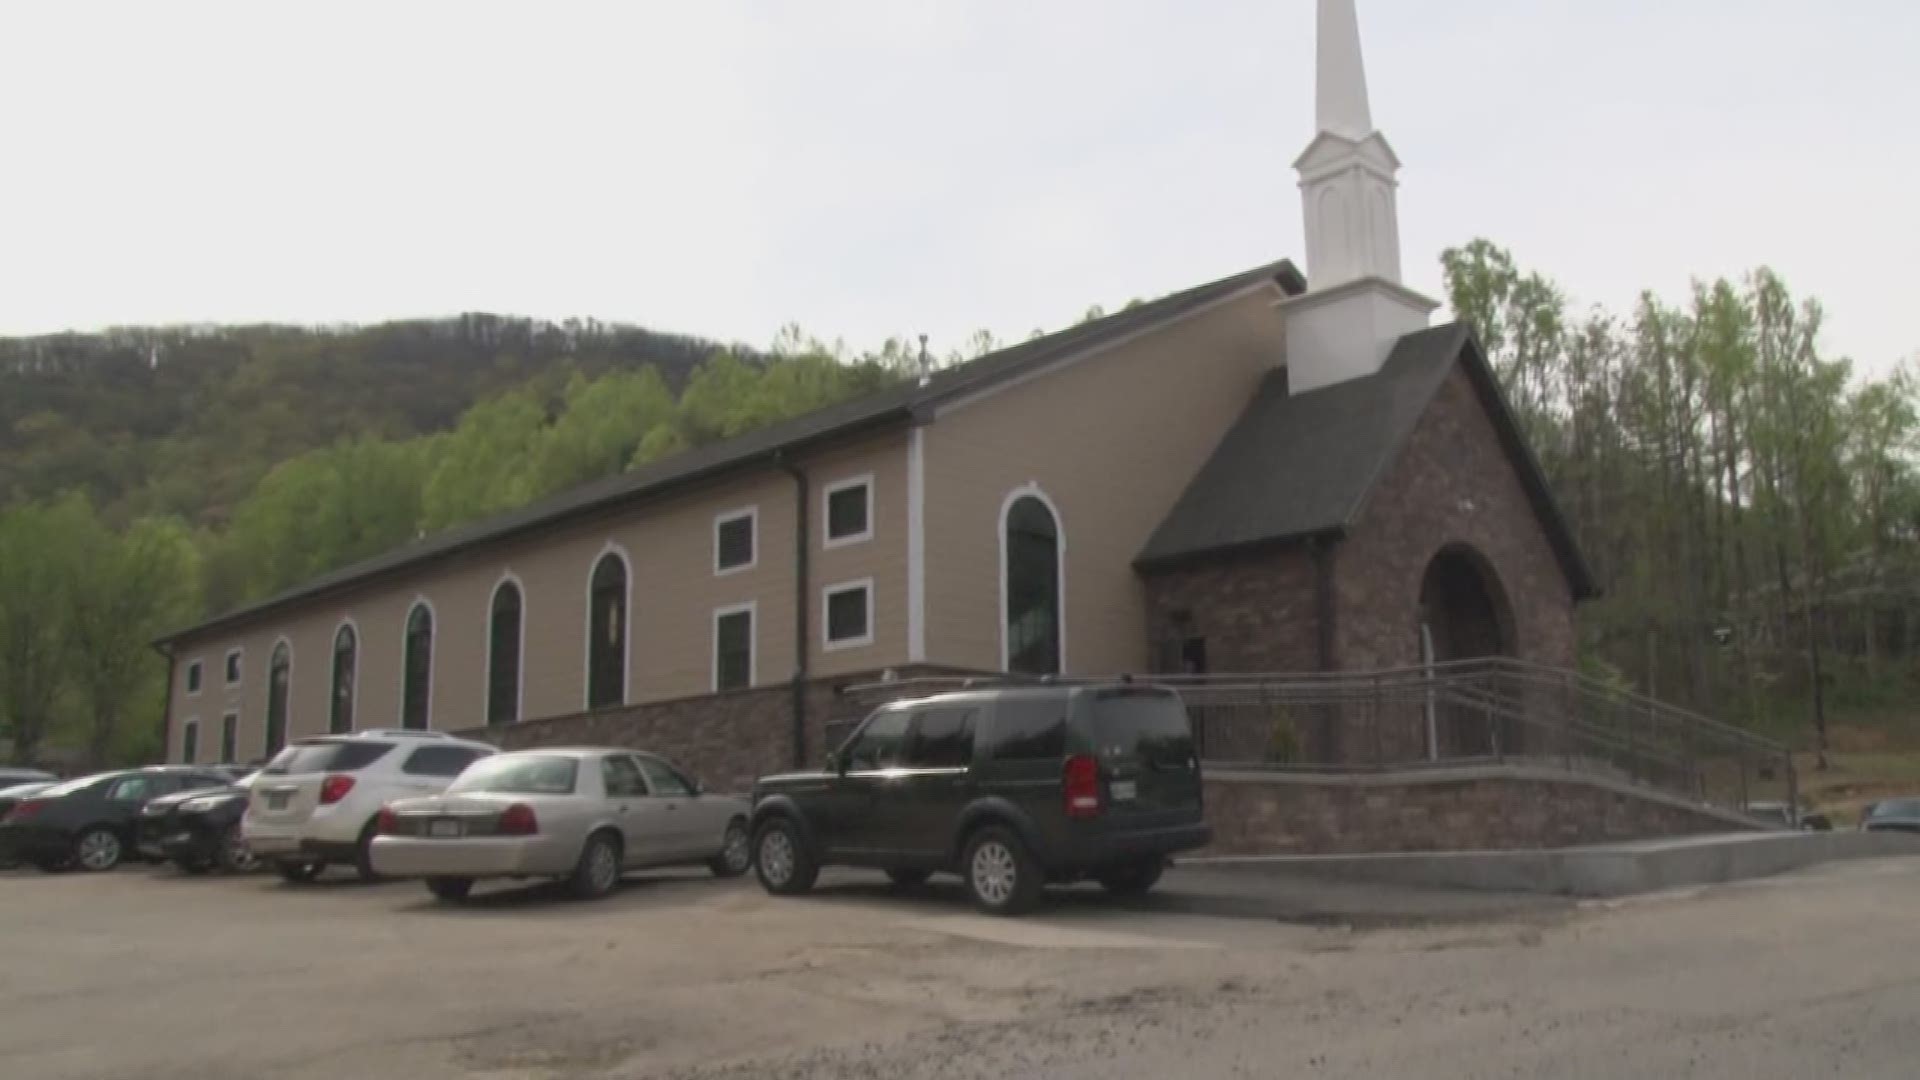 Roaring Fork Baptist Church celebrates opening the doors to its newest church building on Sunday.